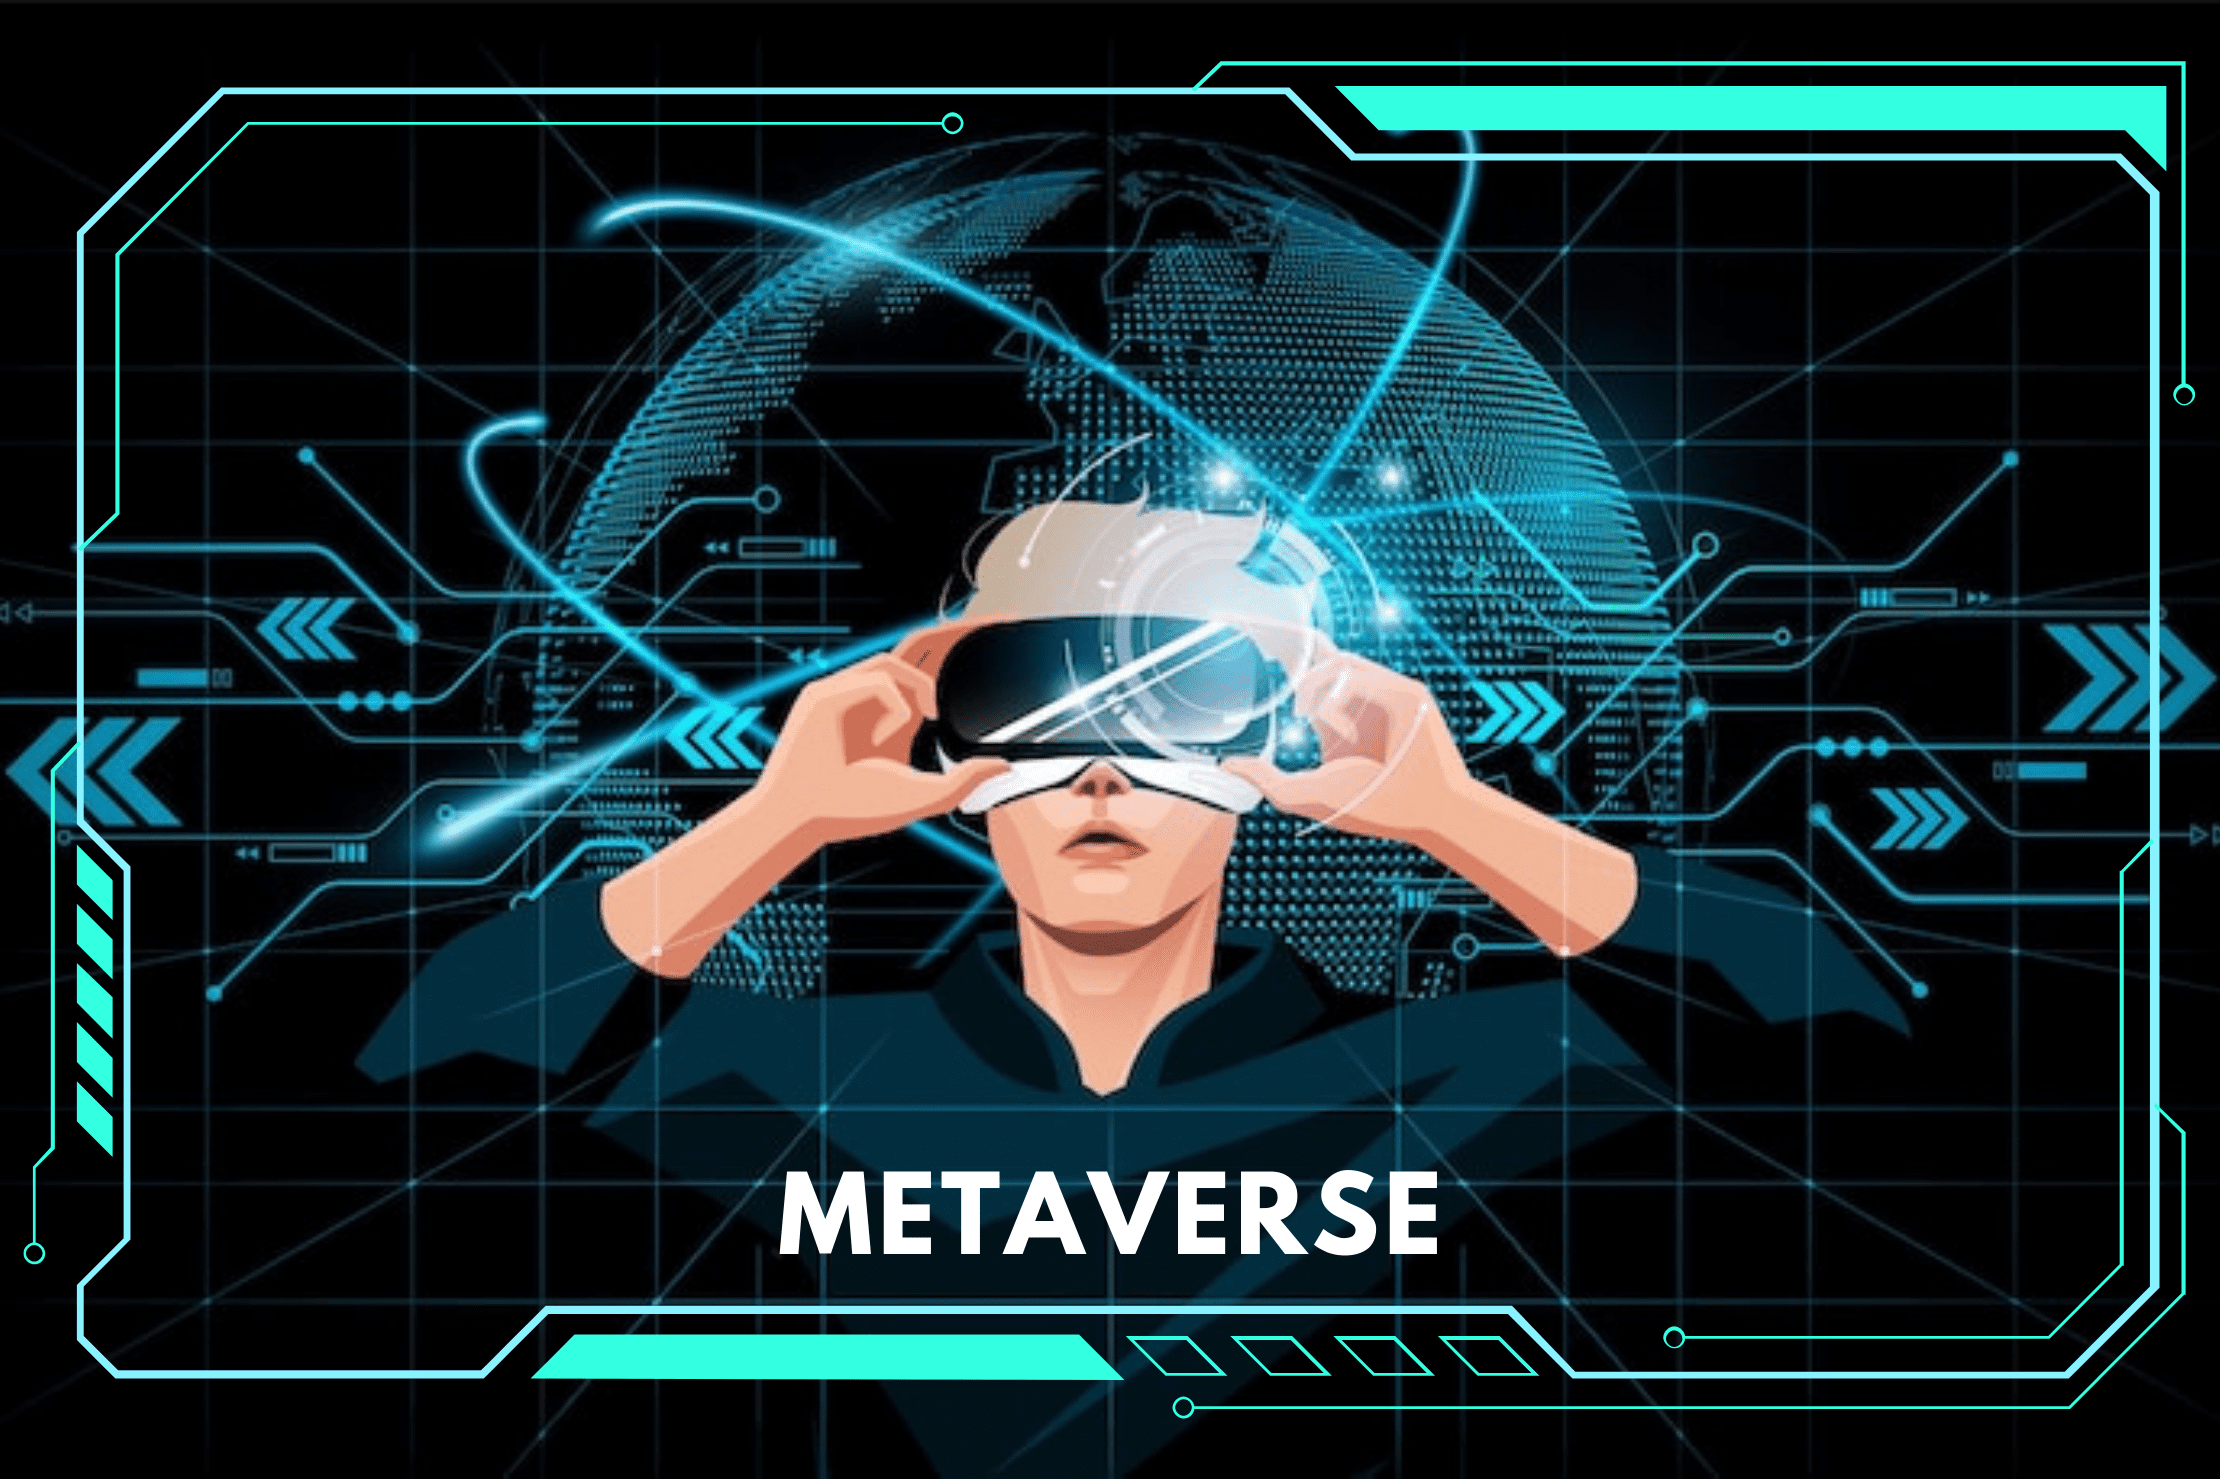 How Does The Metaverse Work?